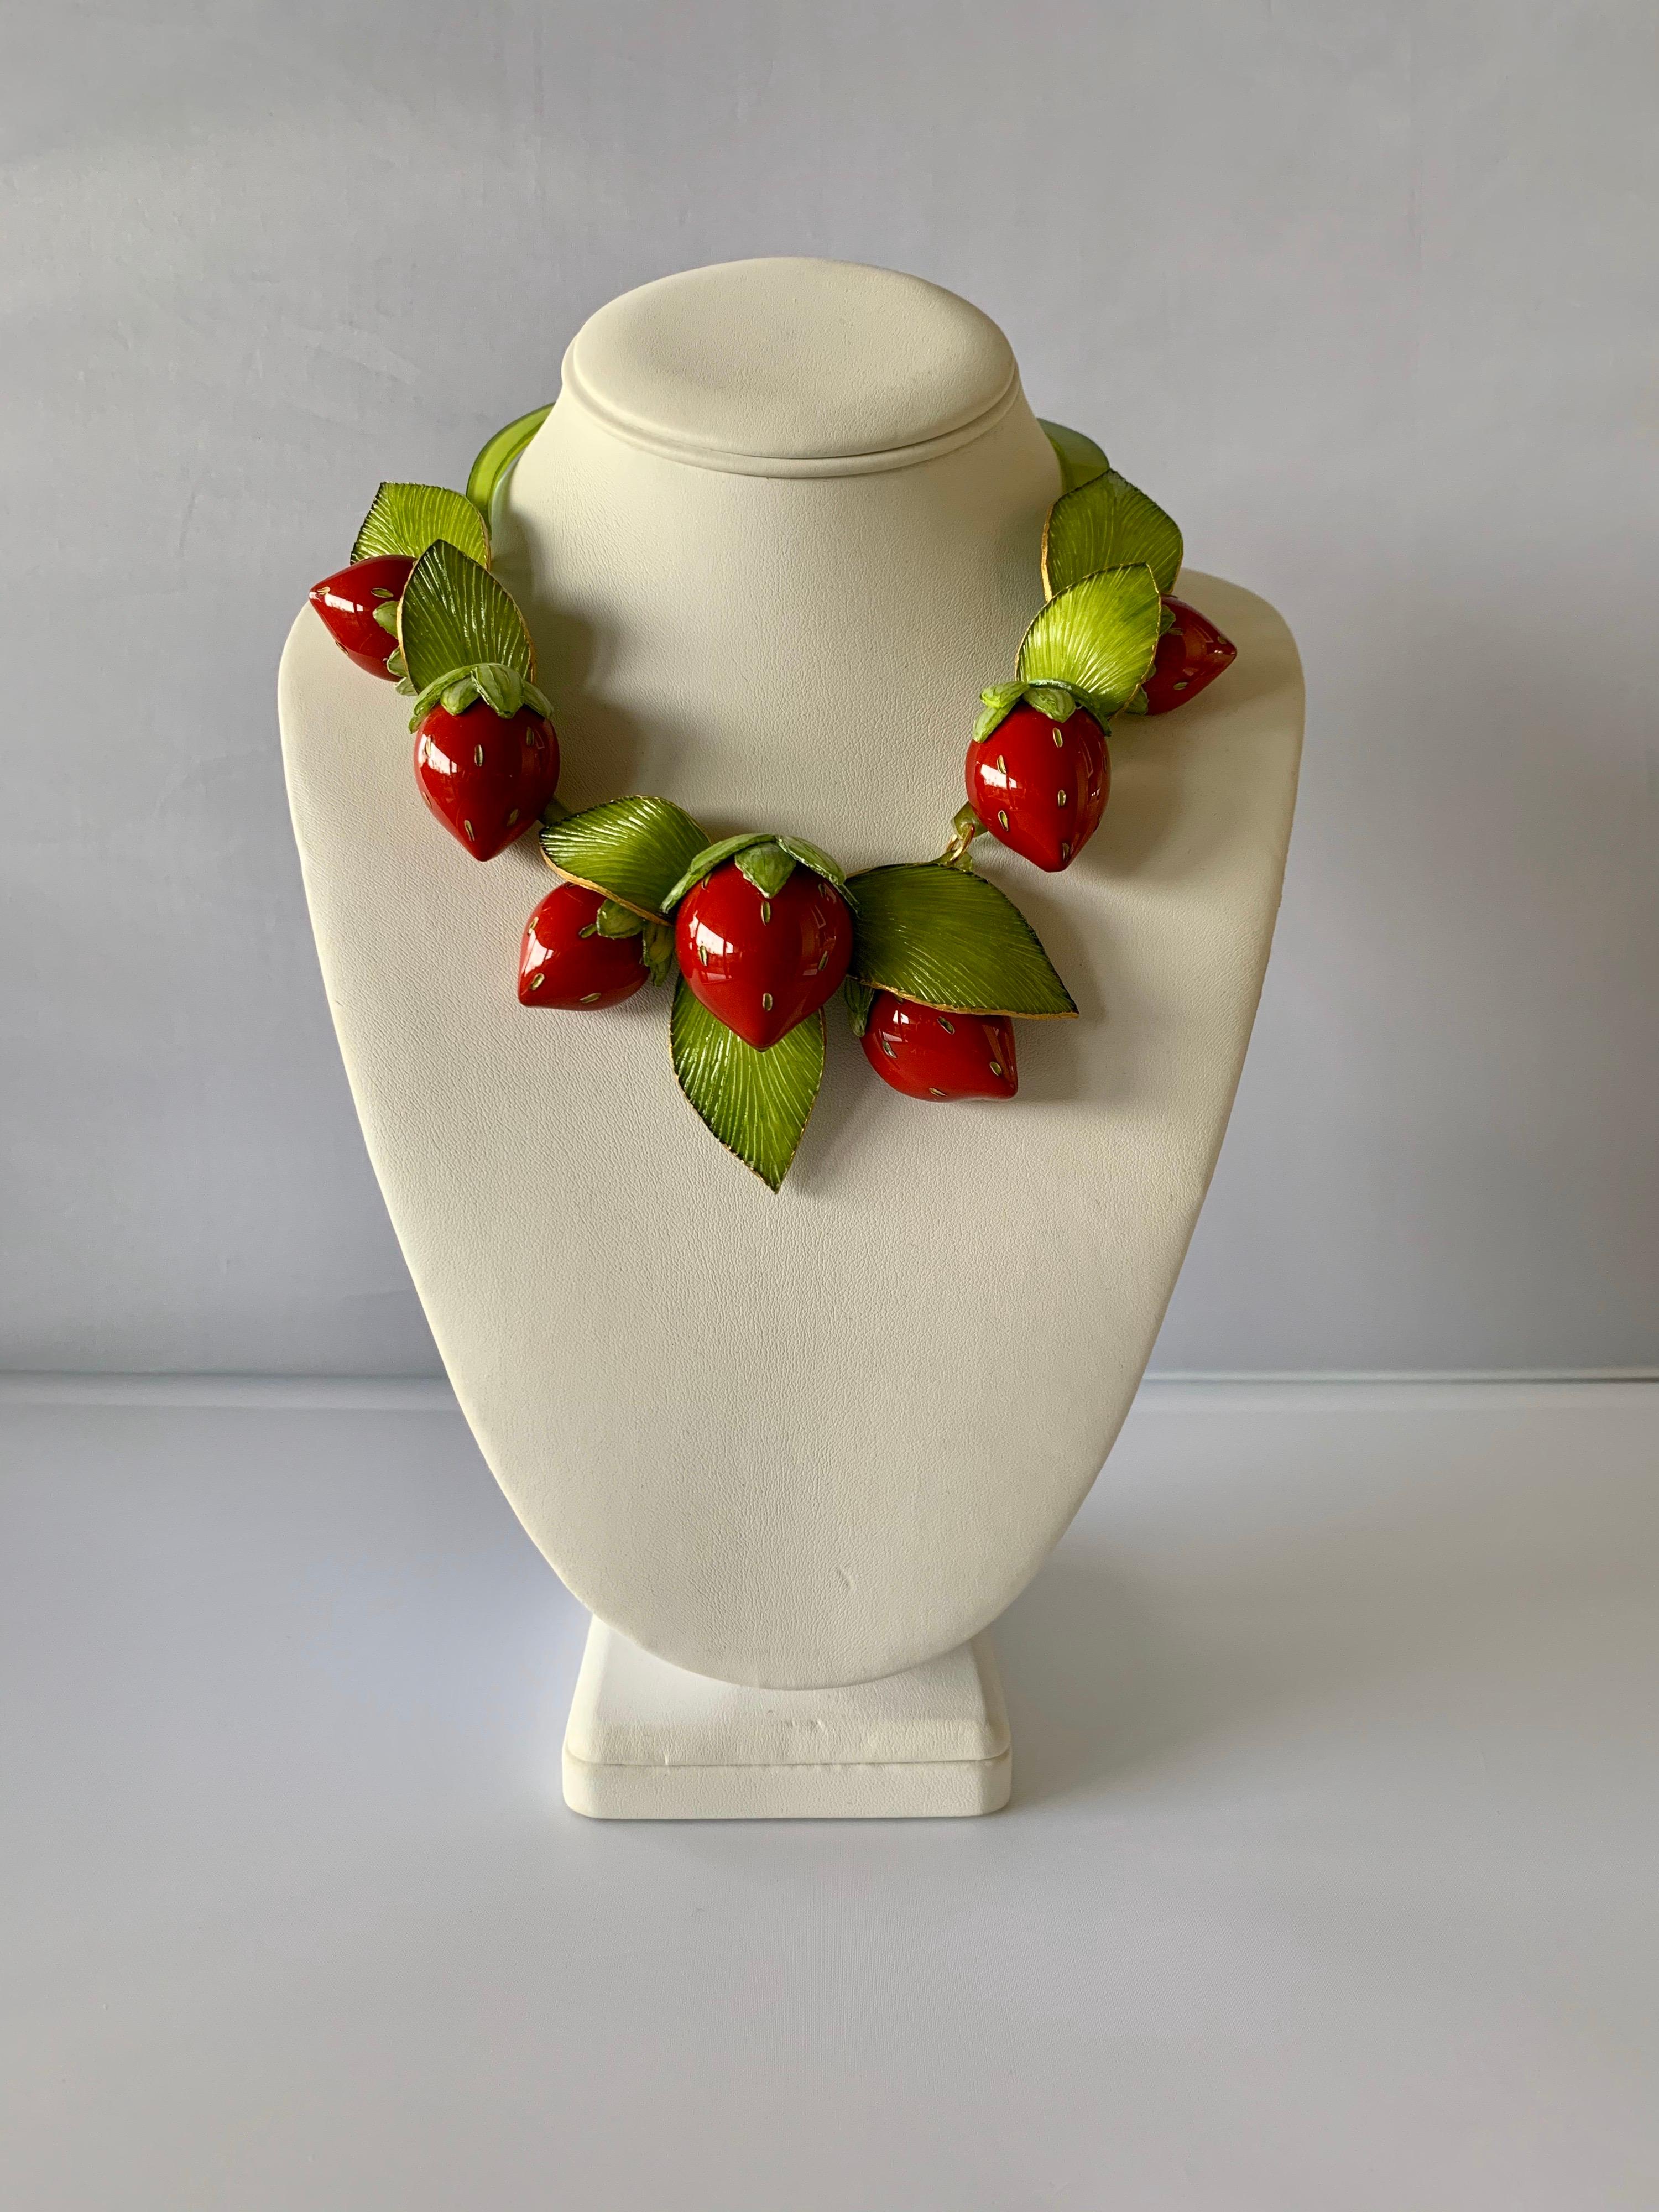 Light and easy to wear, the contemporary handmade adjustable artisanal necklace was made in Paris by Cilea. The statement necklace features seven red enameline (enamel and resin composite) strawberries. The strawberries differ size and feature